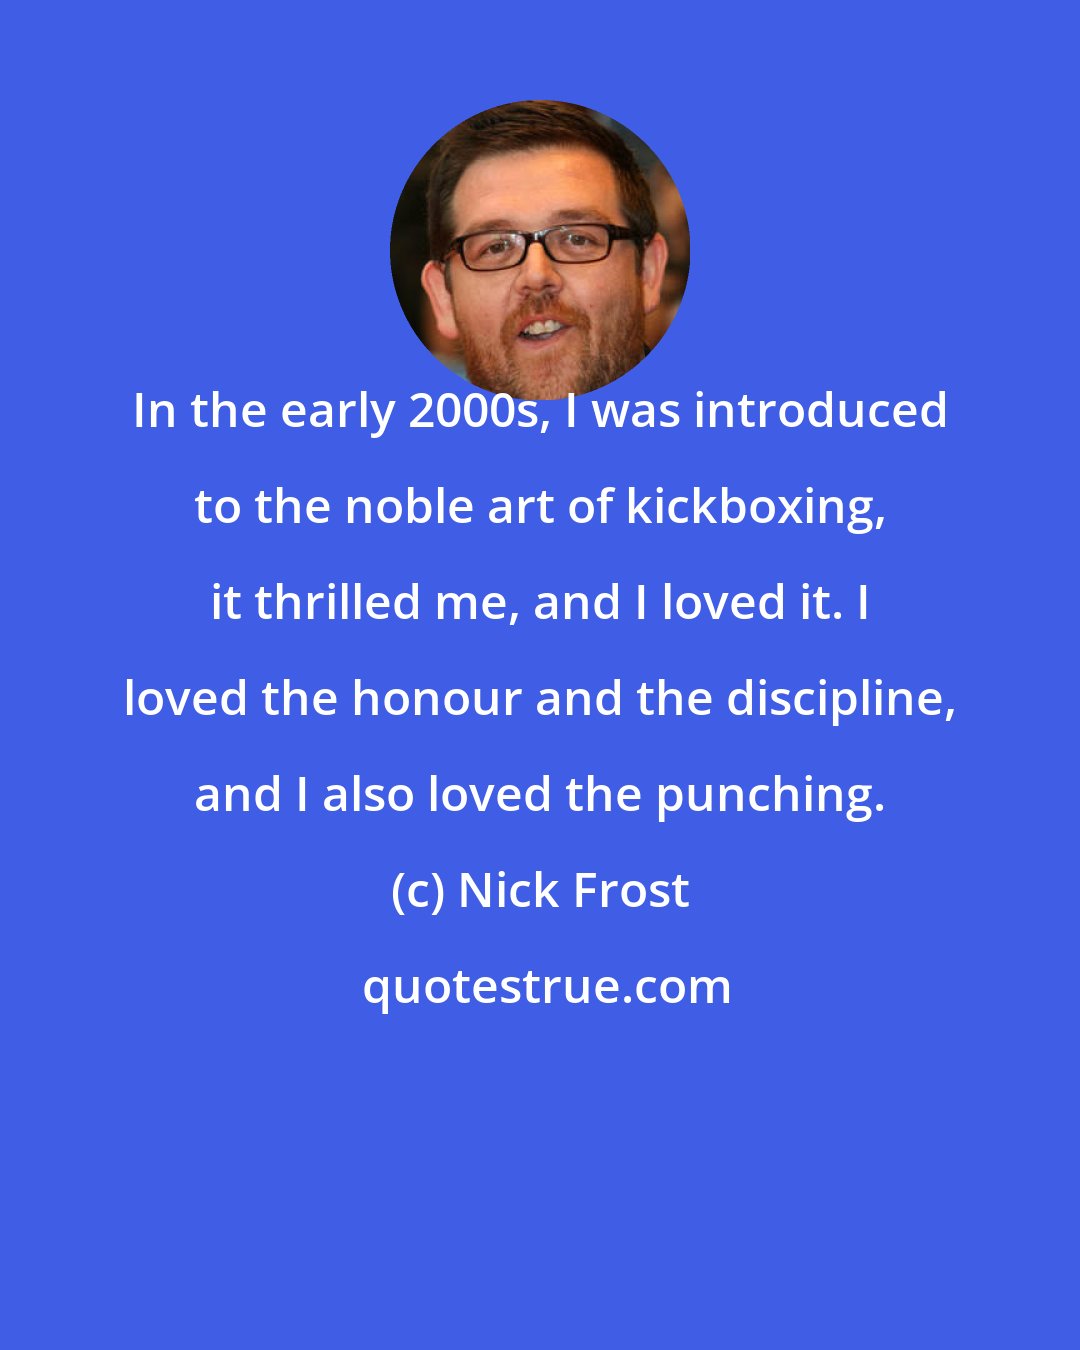 Nick Frost: In the early 2000s, I was introduced to the noble art of kickboxing, it thrilled me, and I loved it. I loved the honour and the discipline, and I also loved the punching.